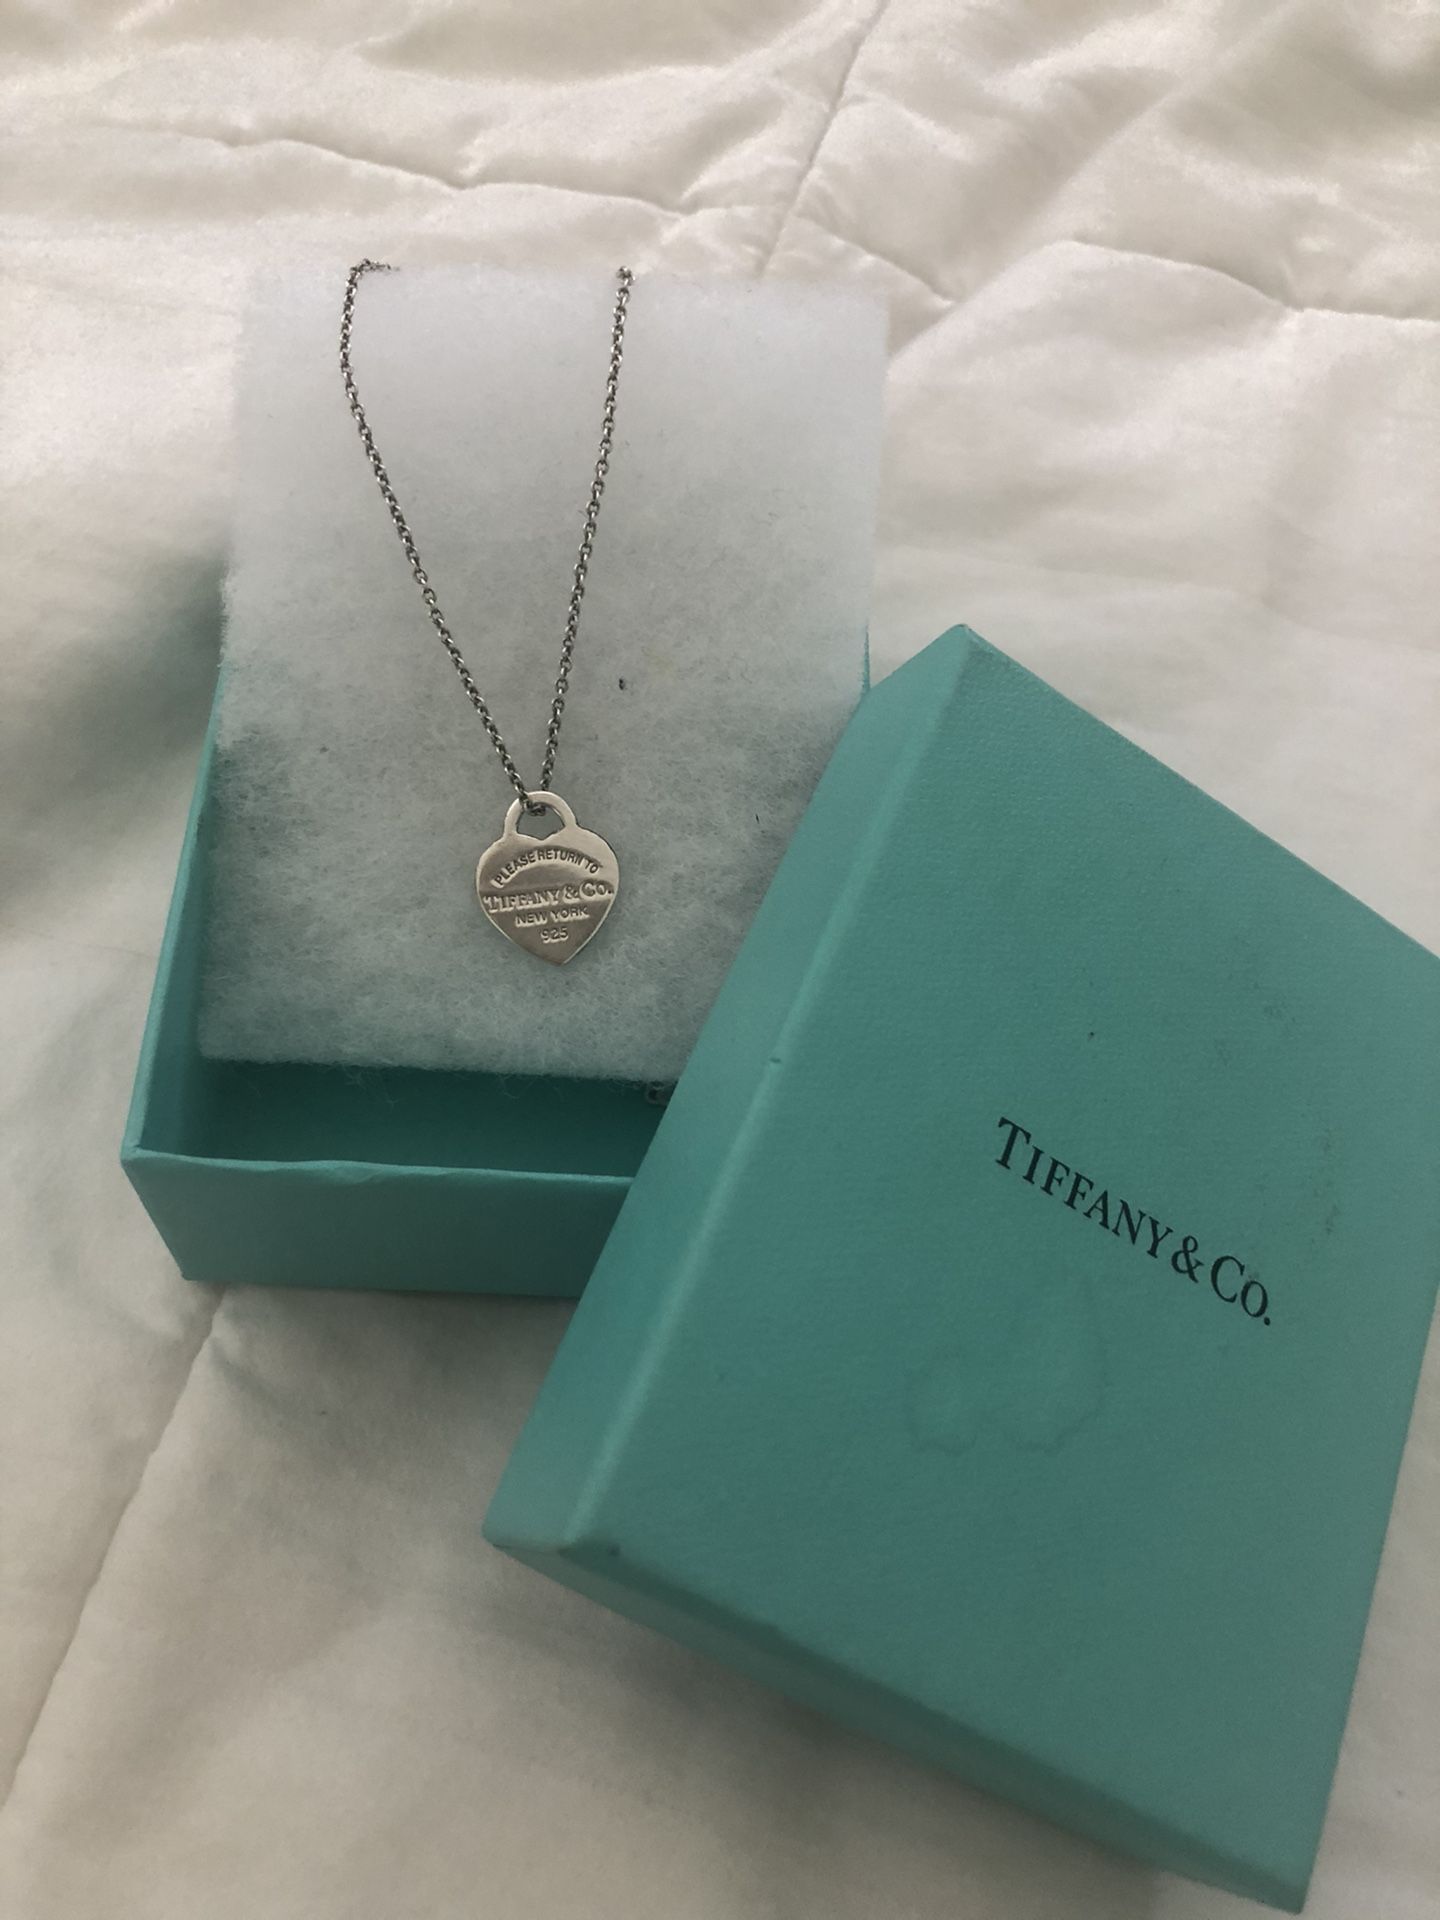 Authentic Tiffany Necklace And Chain